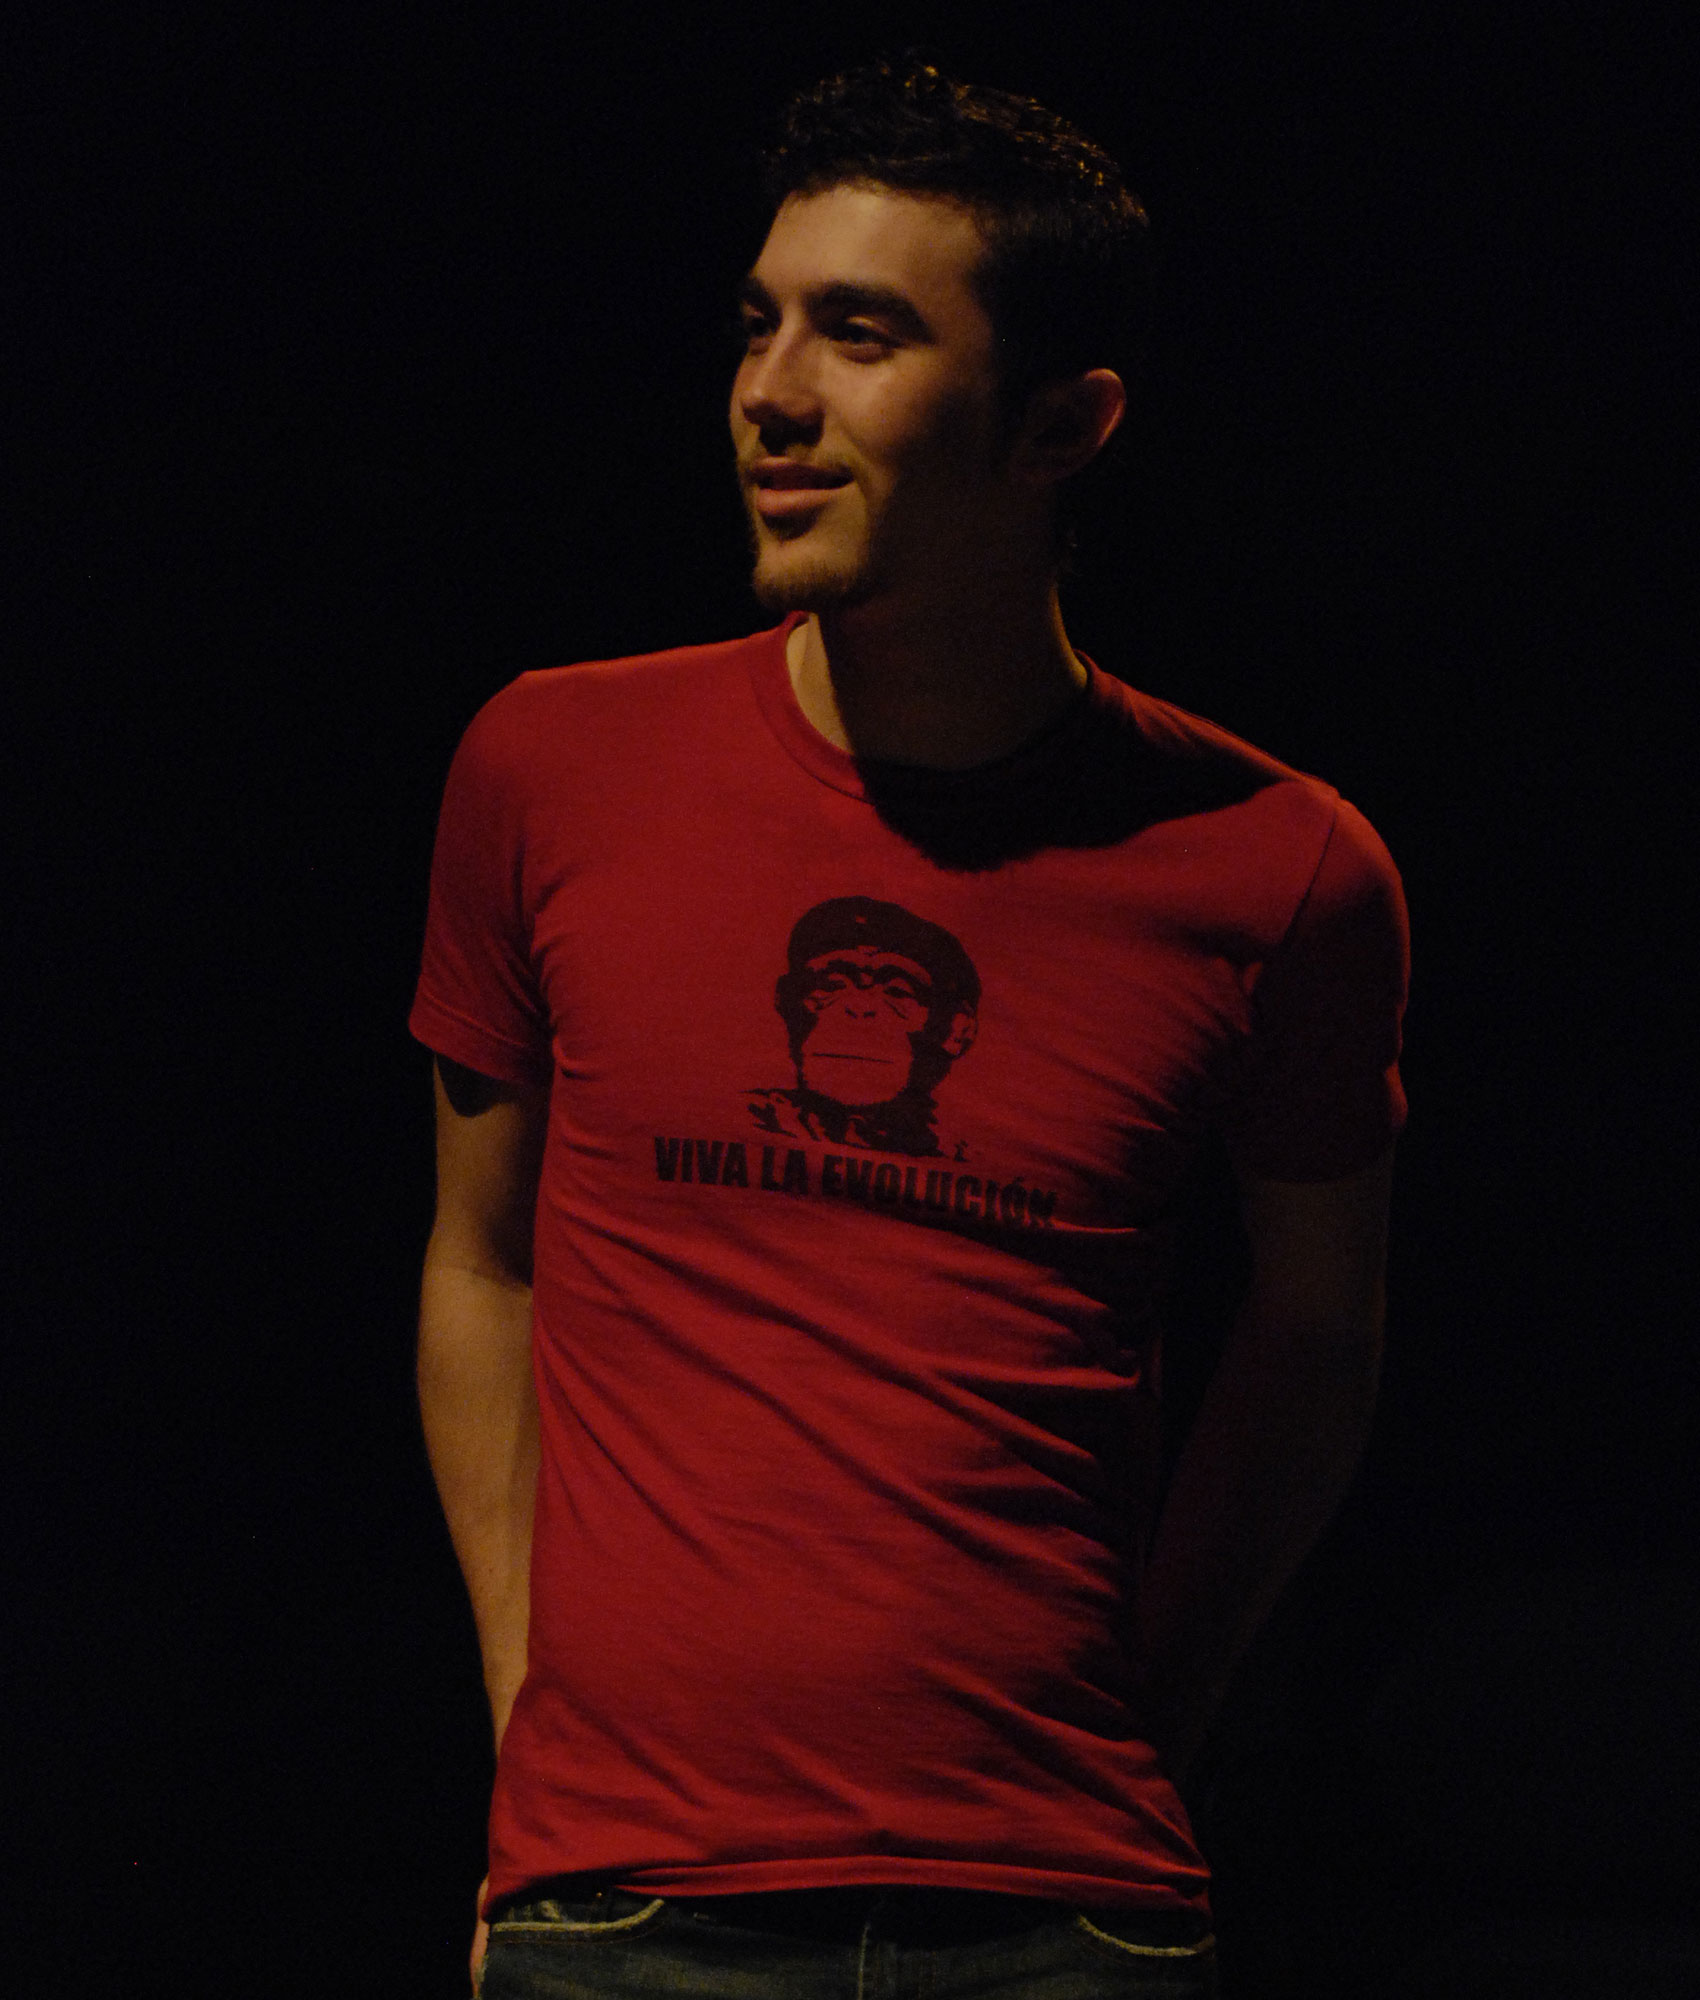 A man stands with a half-smirk on his face wearing a t-shirt that says “VIVA LA EVOLUCIÓN”.